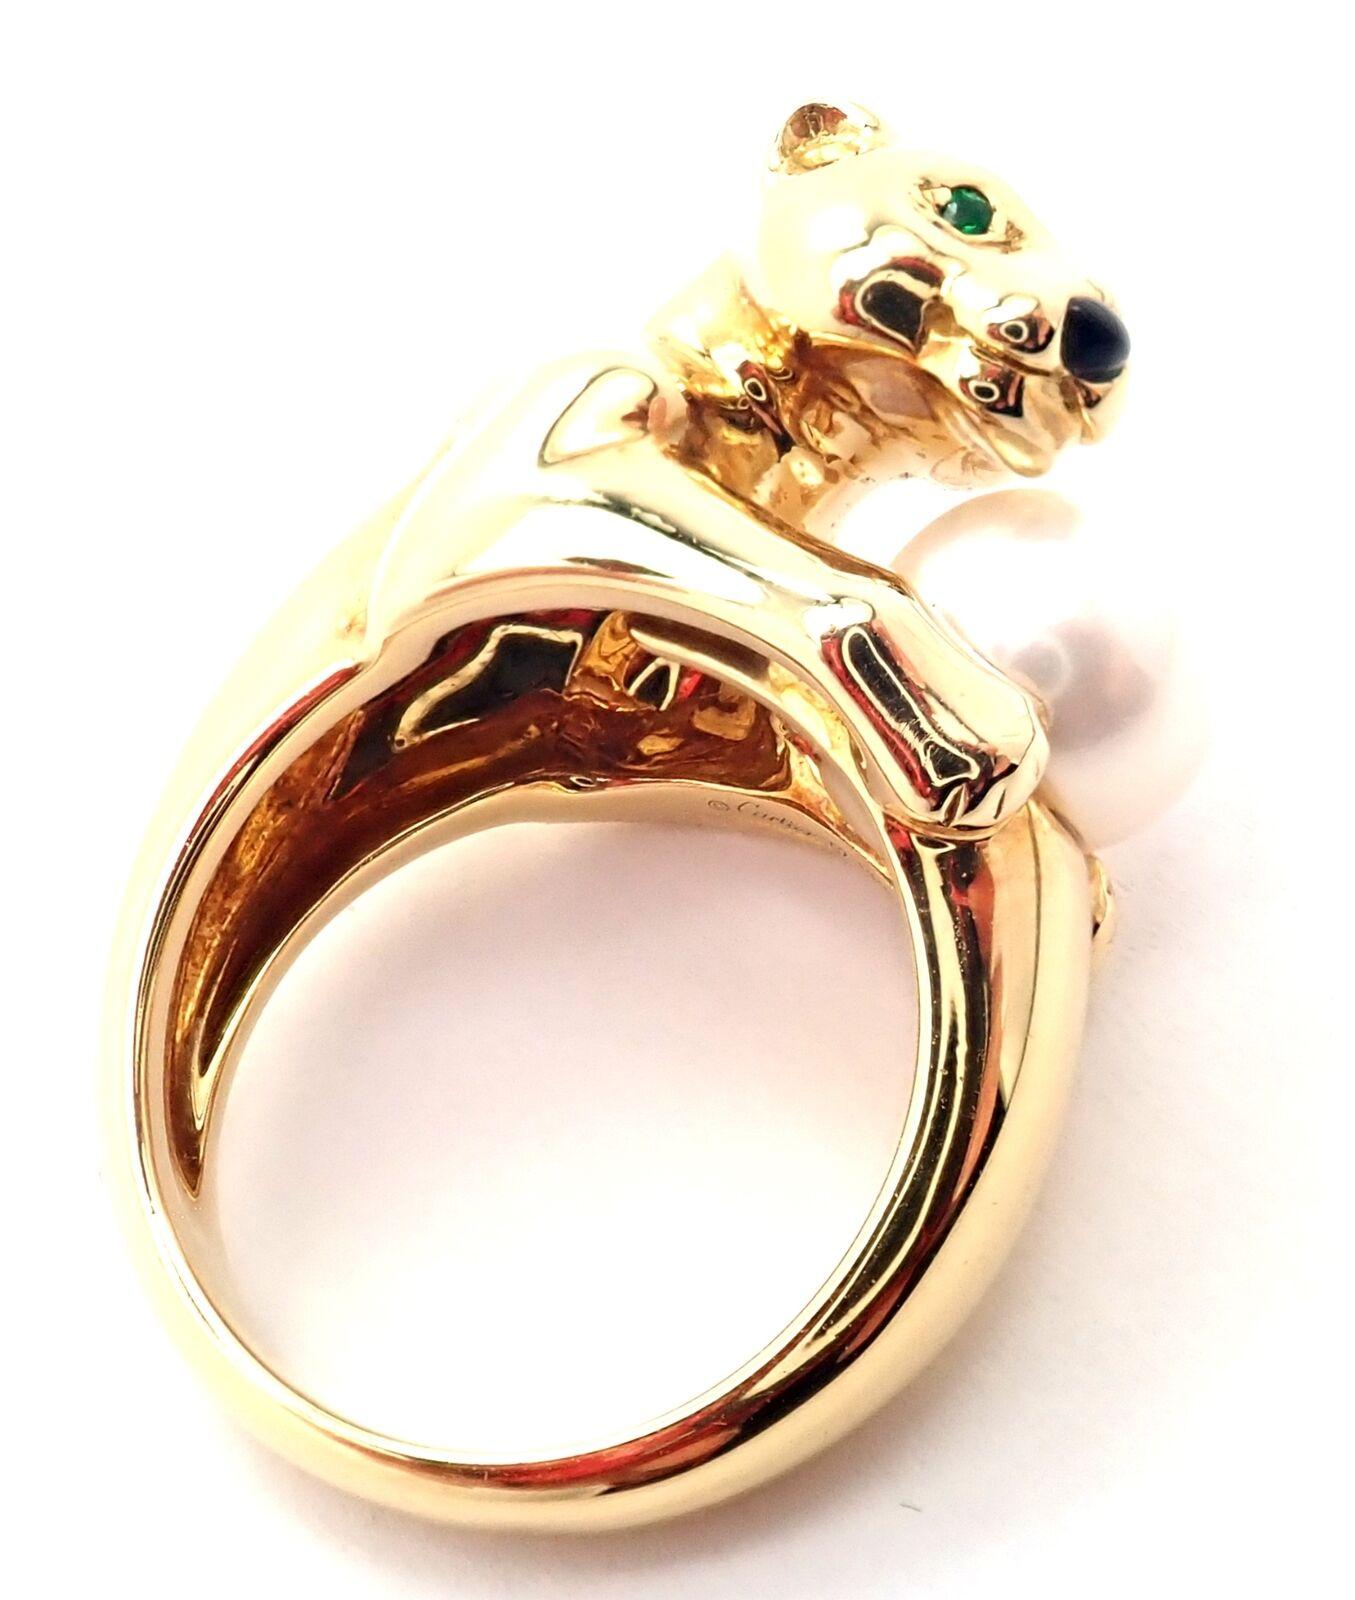 Brilliant Cut Cartier Panther Pearl Onyx Emerald Yellow Gold Ring